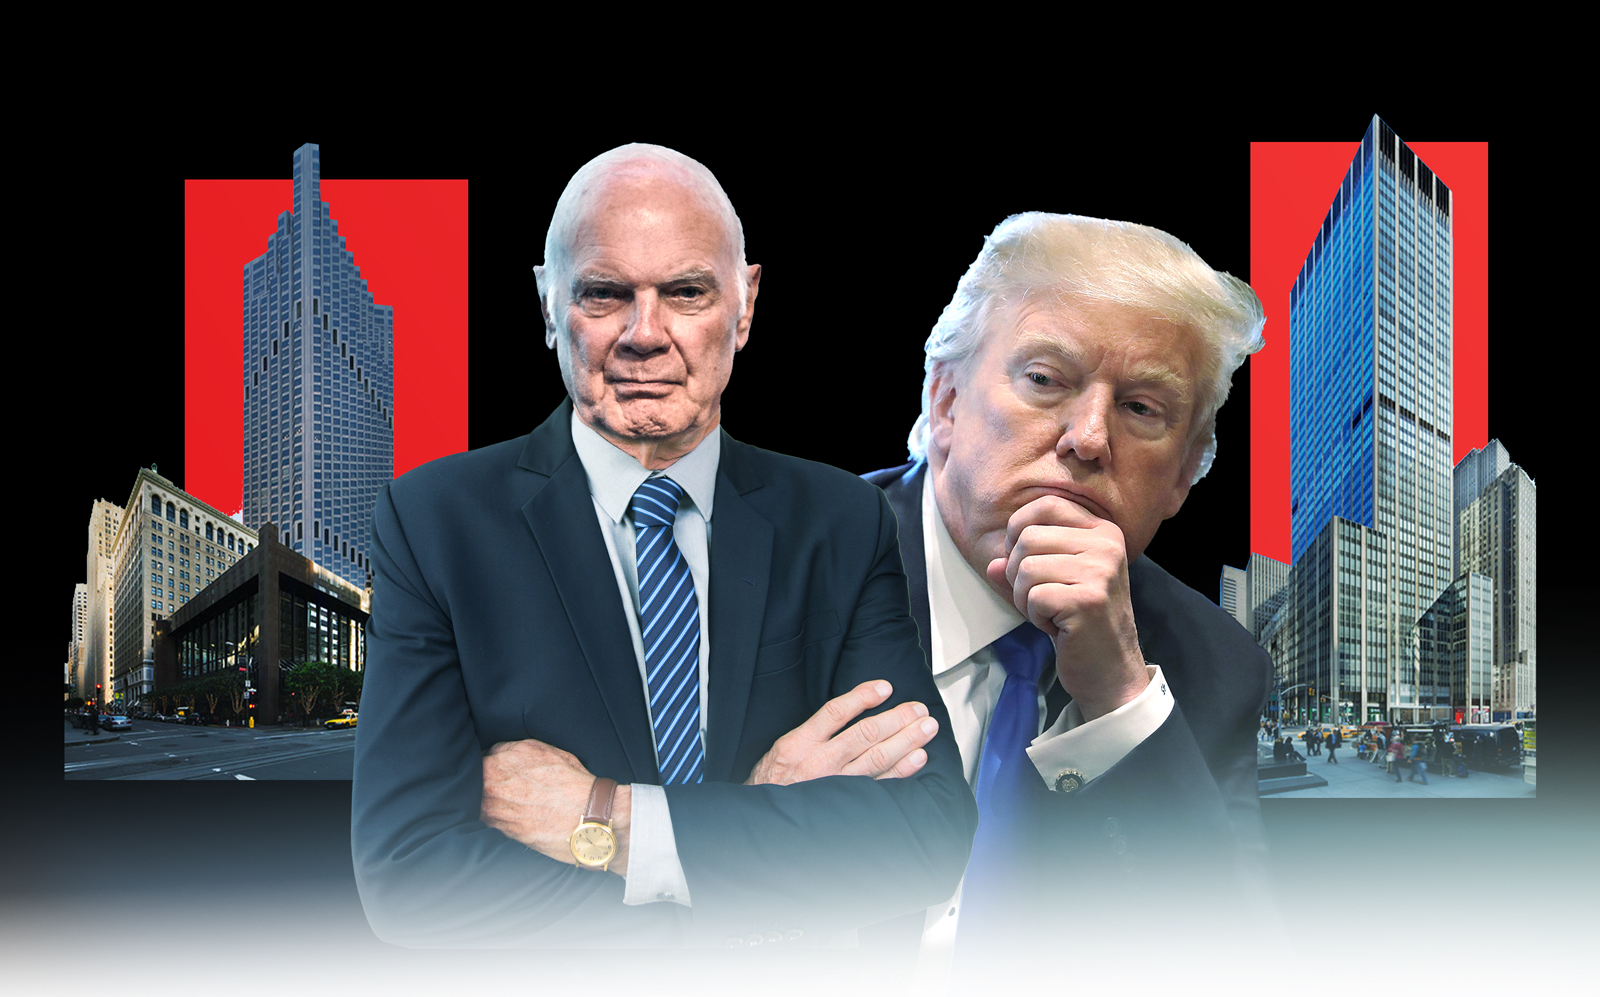 From left: 555 California Street in San Francisco, Vornado CEO Steven Roth, Donald Trump, 1290 Avenue of the Americas in New York (Getty, VNO/Photo Illustration by Kevin Rebong for The Real Deal)